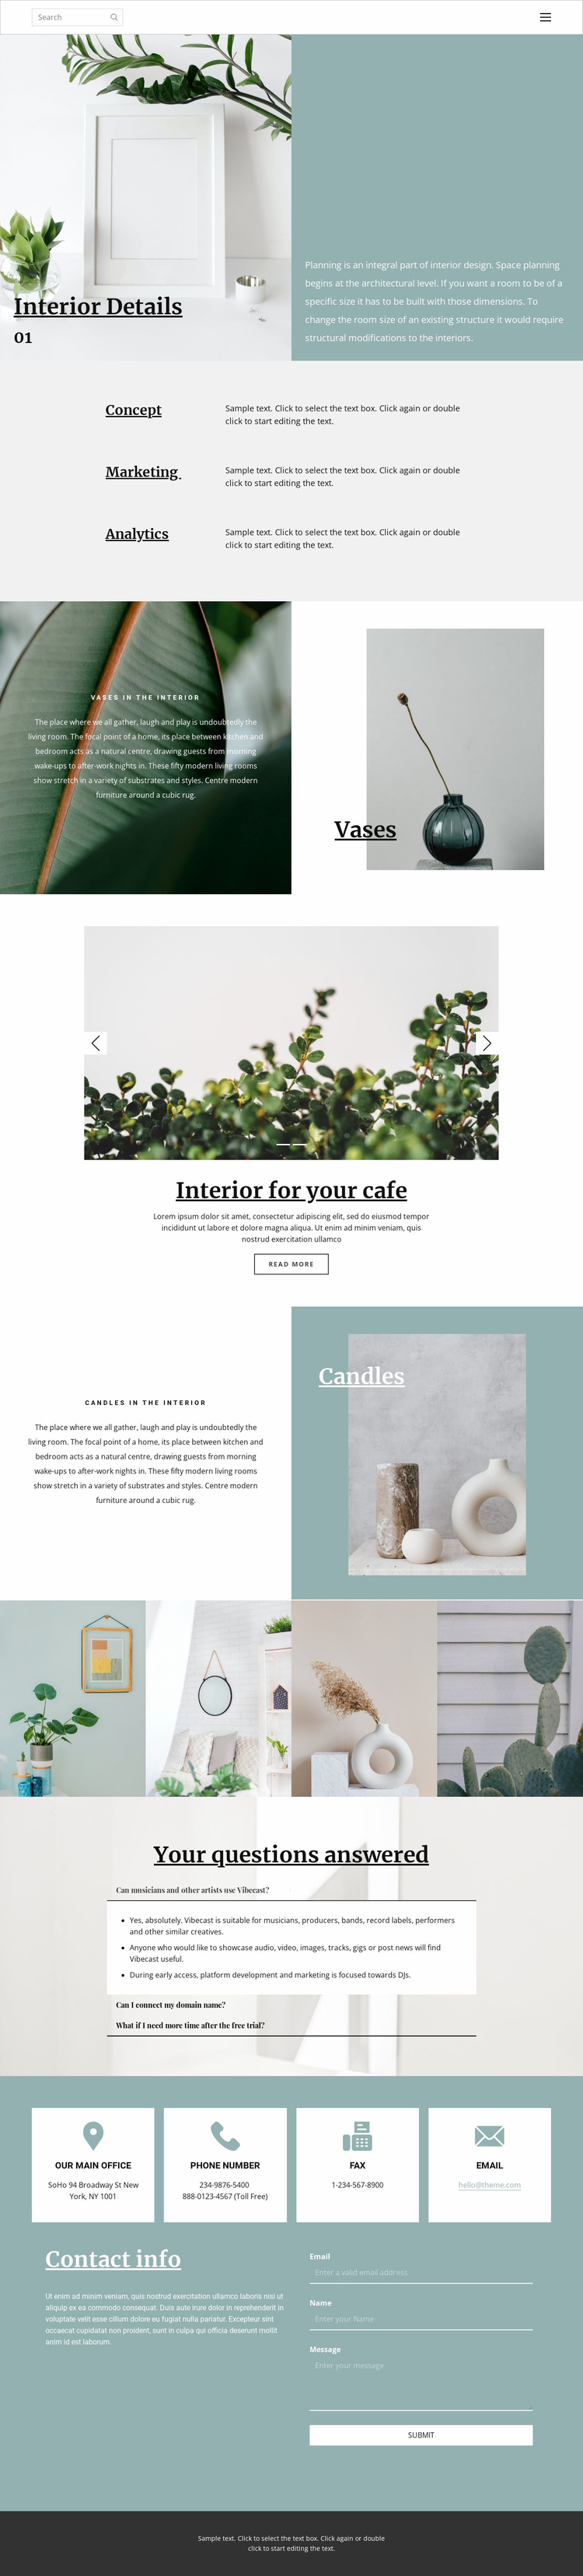 Help in organizing the space at home Website Template